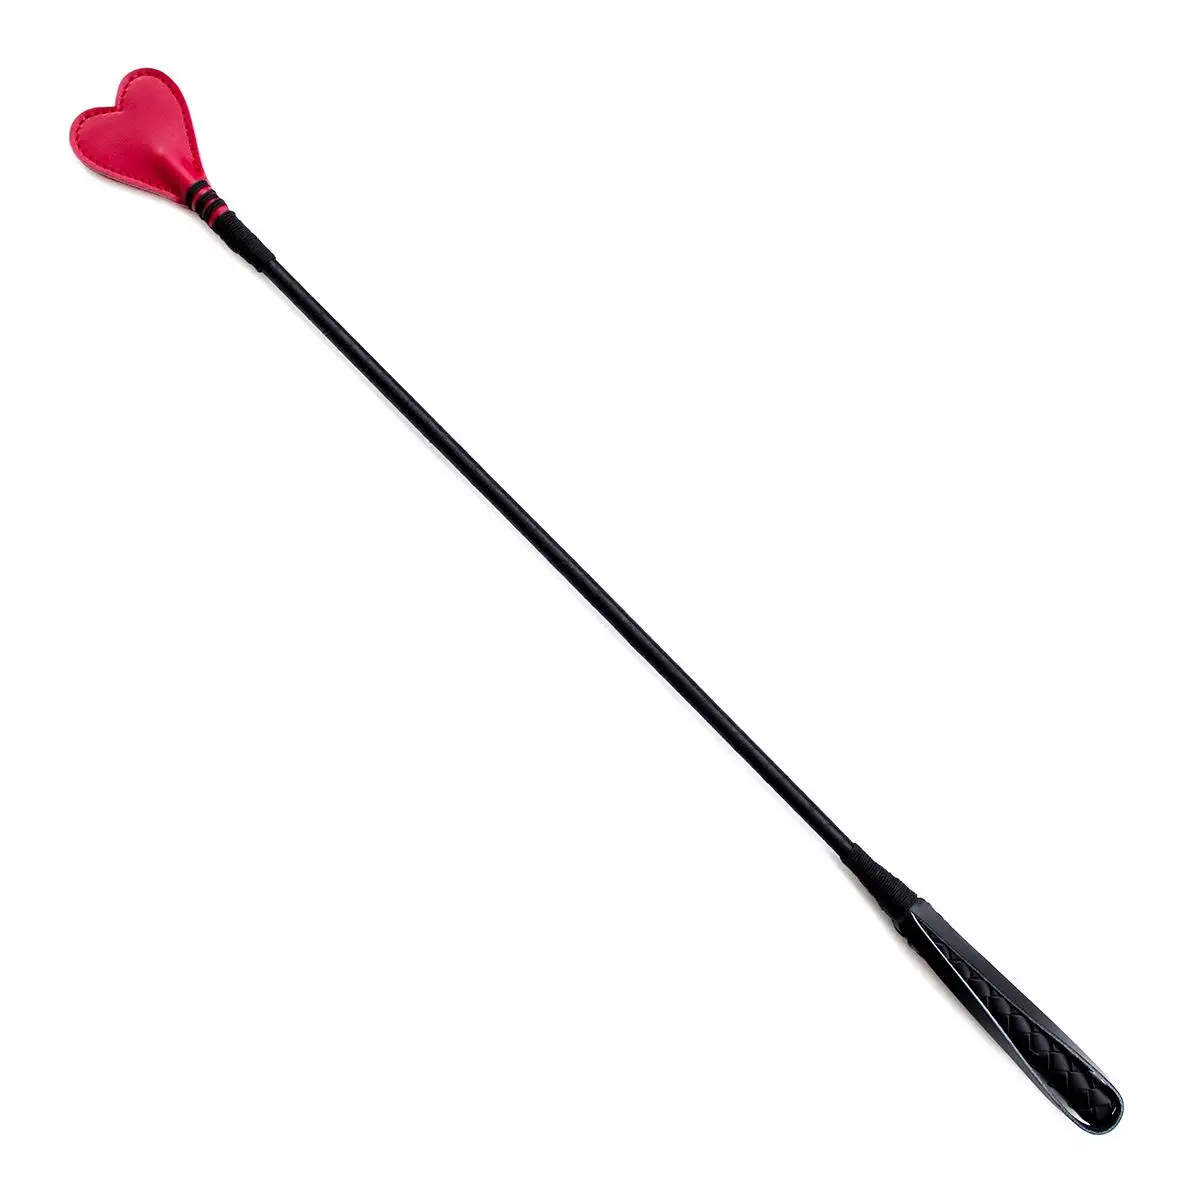 MOGlovers Sex Shop Spanking Paddle PU Leather Heart Shape New Sex Latest Products for Adult game